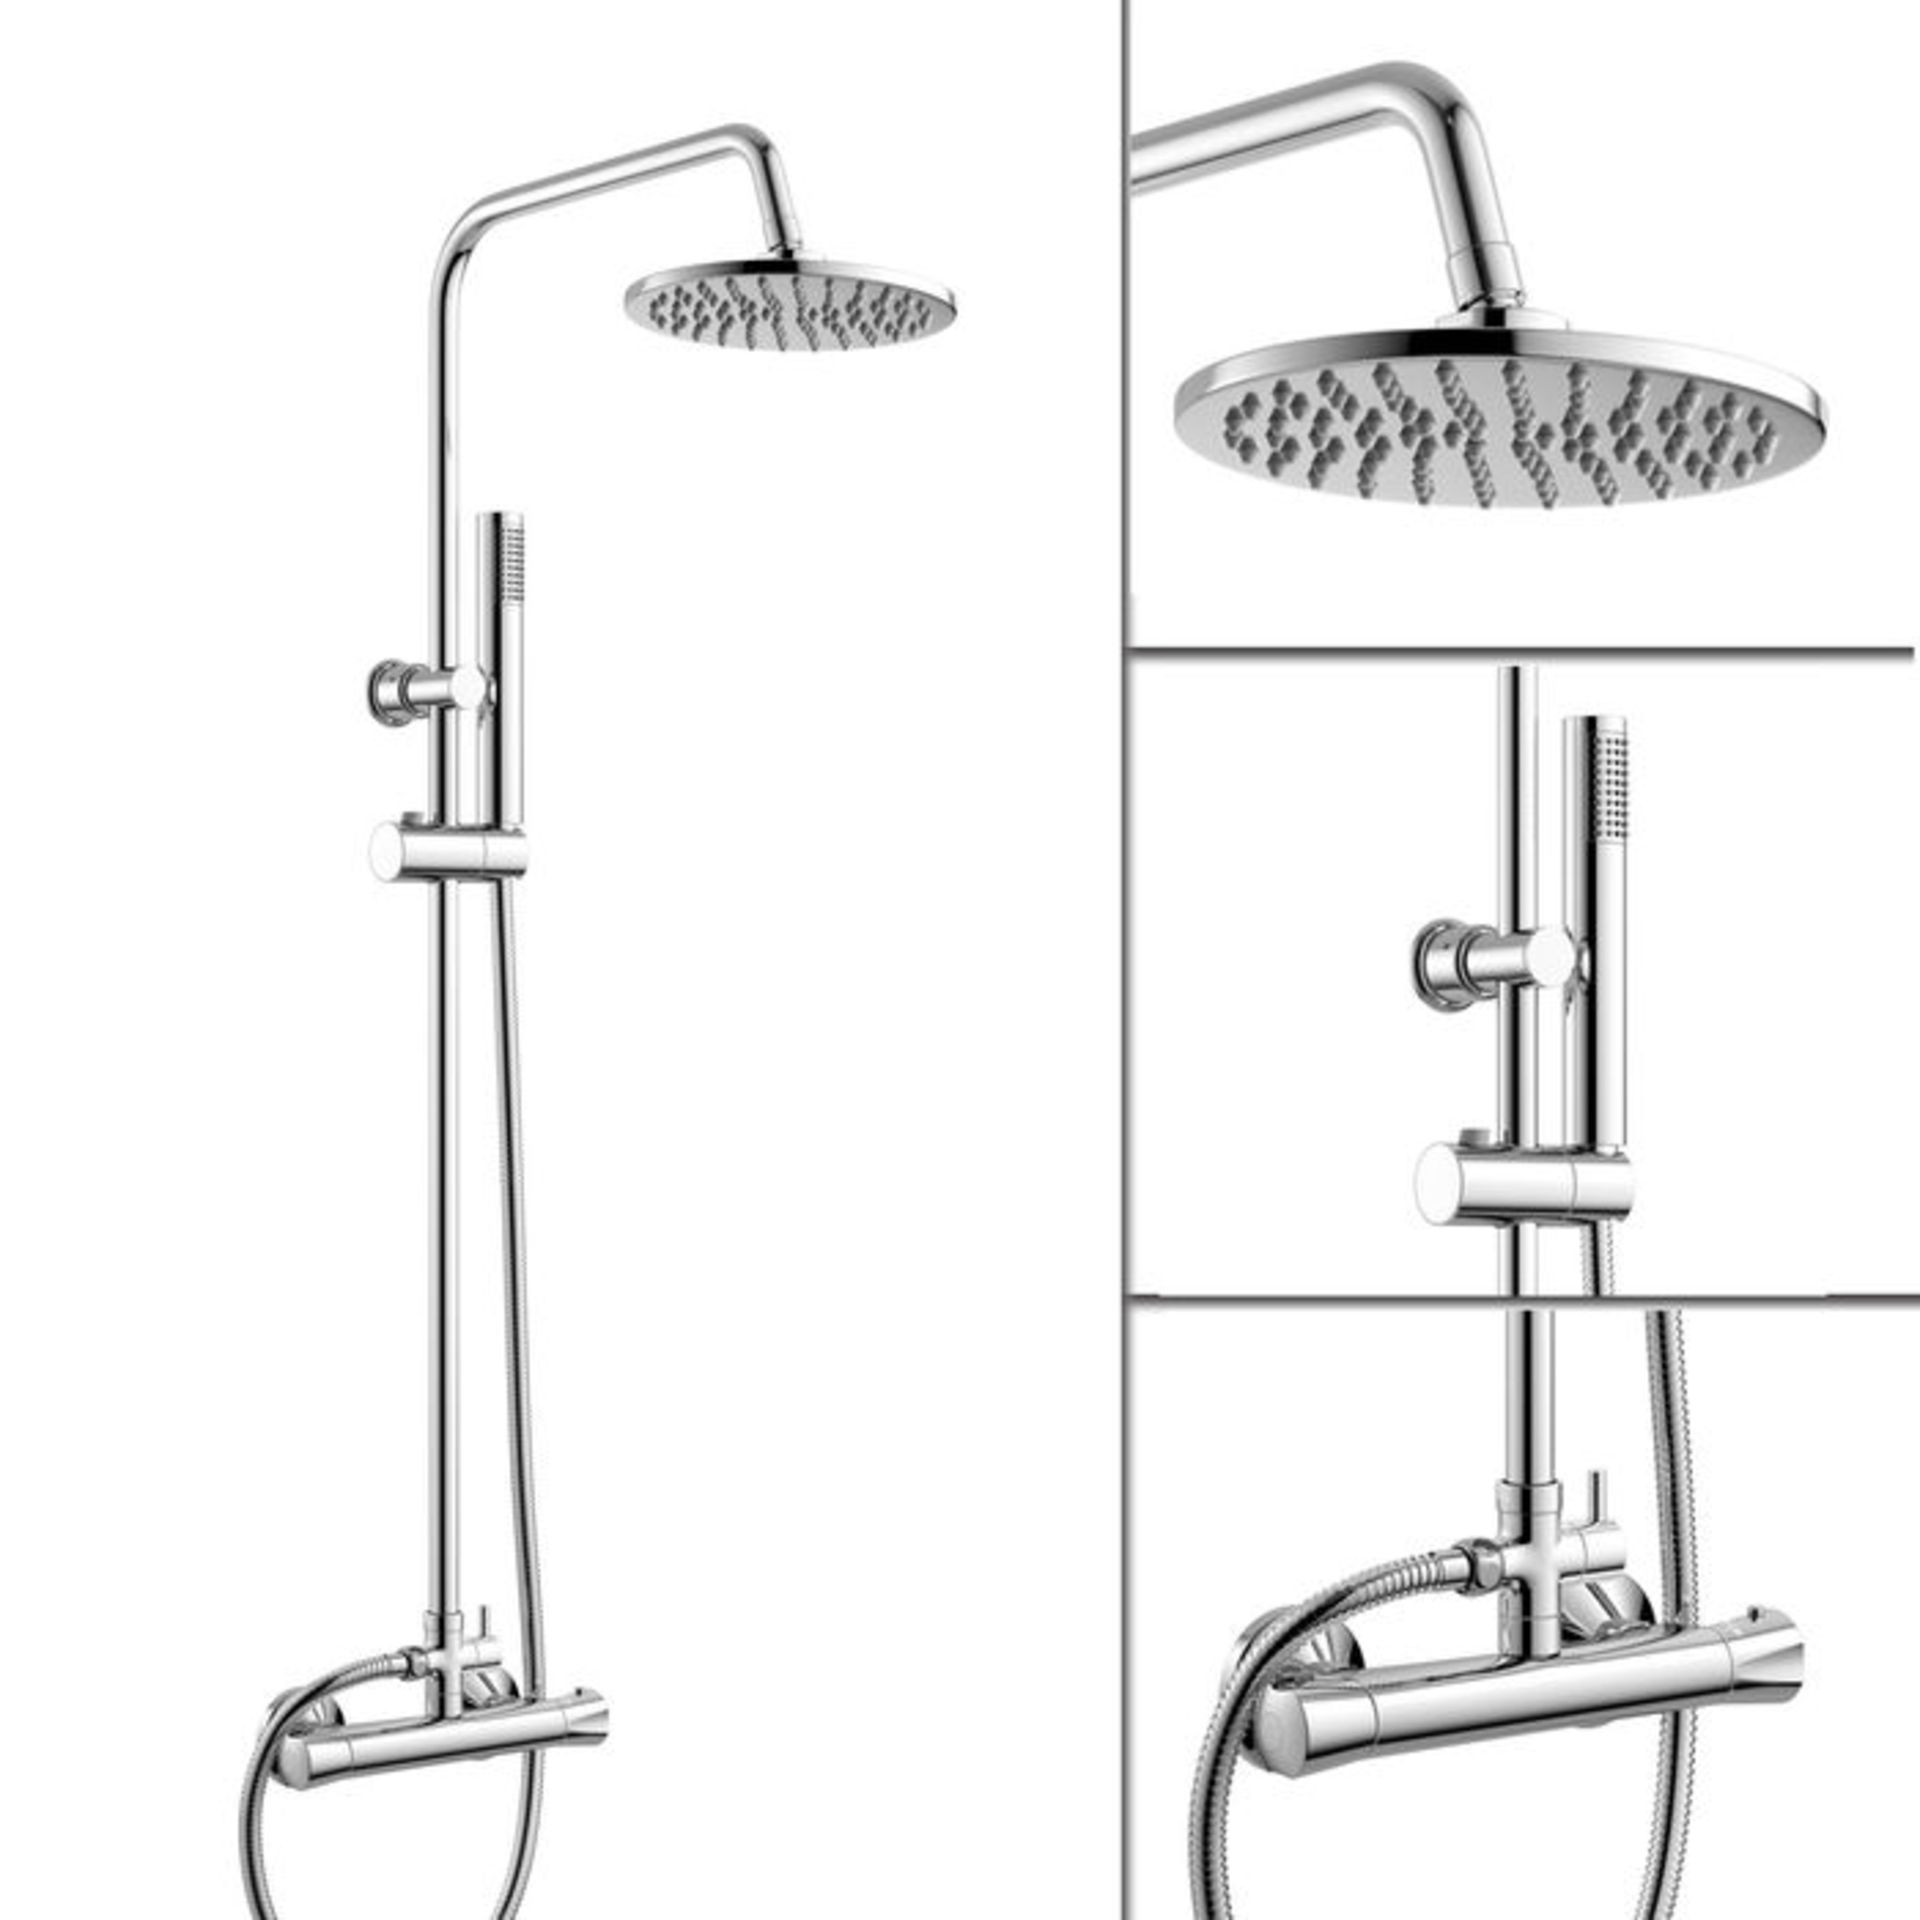 (SM3) Round Exposed Thermostatic Shower Kit & Head. Shower head features a tilt action for maximum - Image 2 of 2